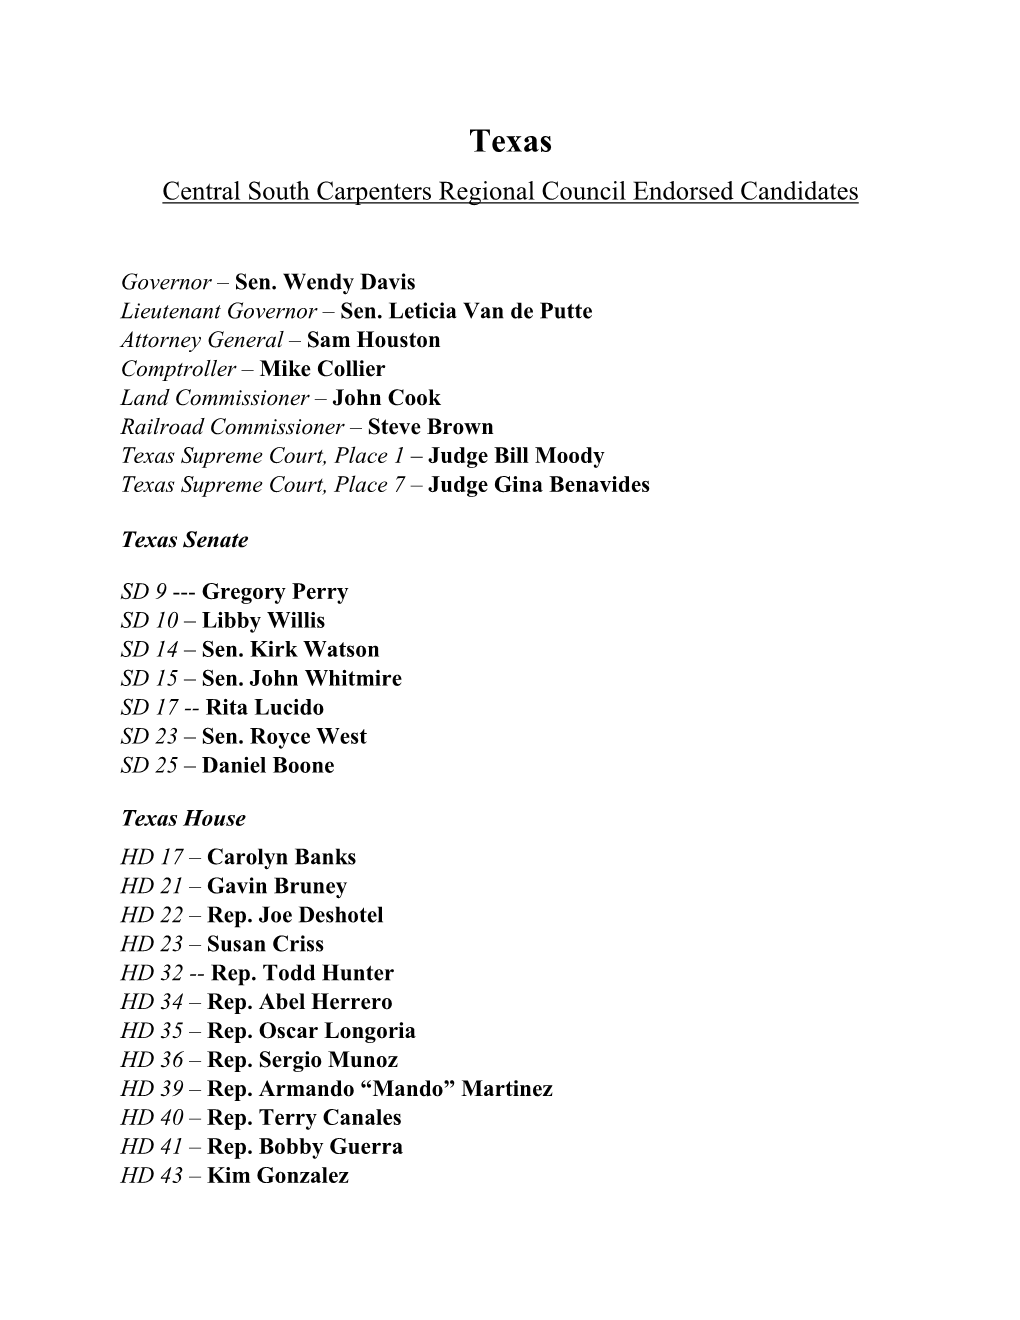 Texas Central South Carpenters Regional Council Endorsed Candidates